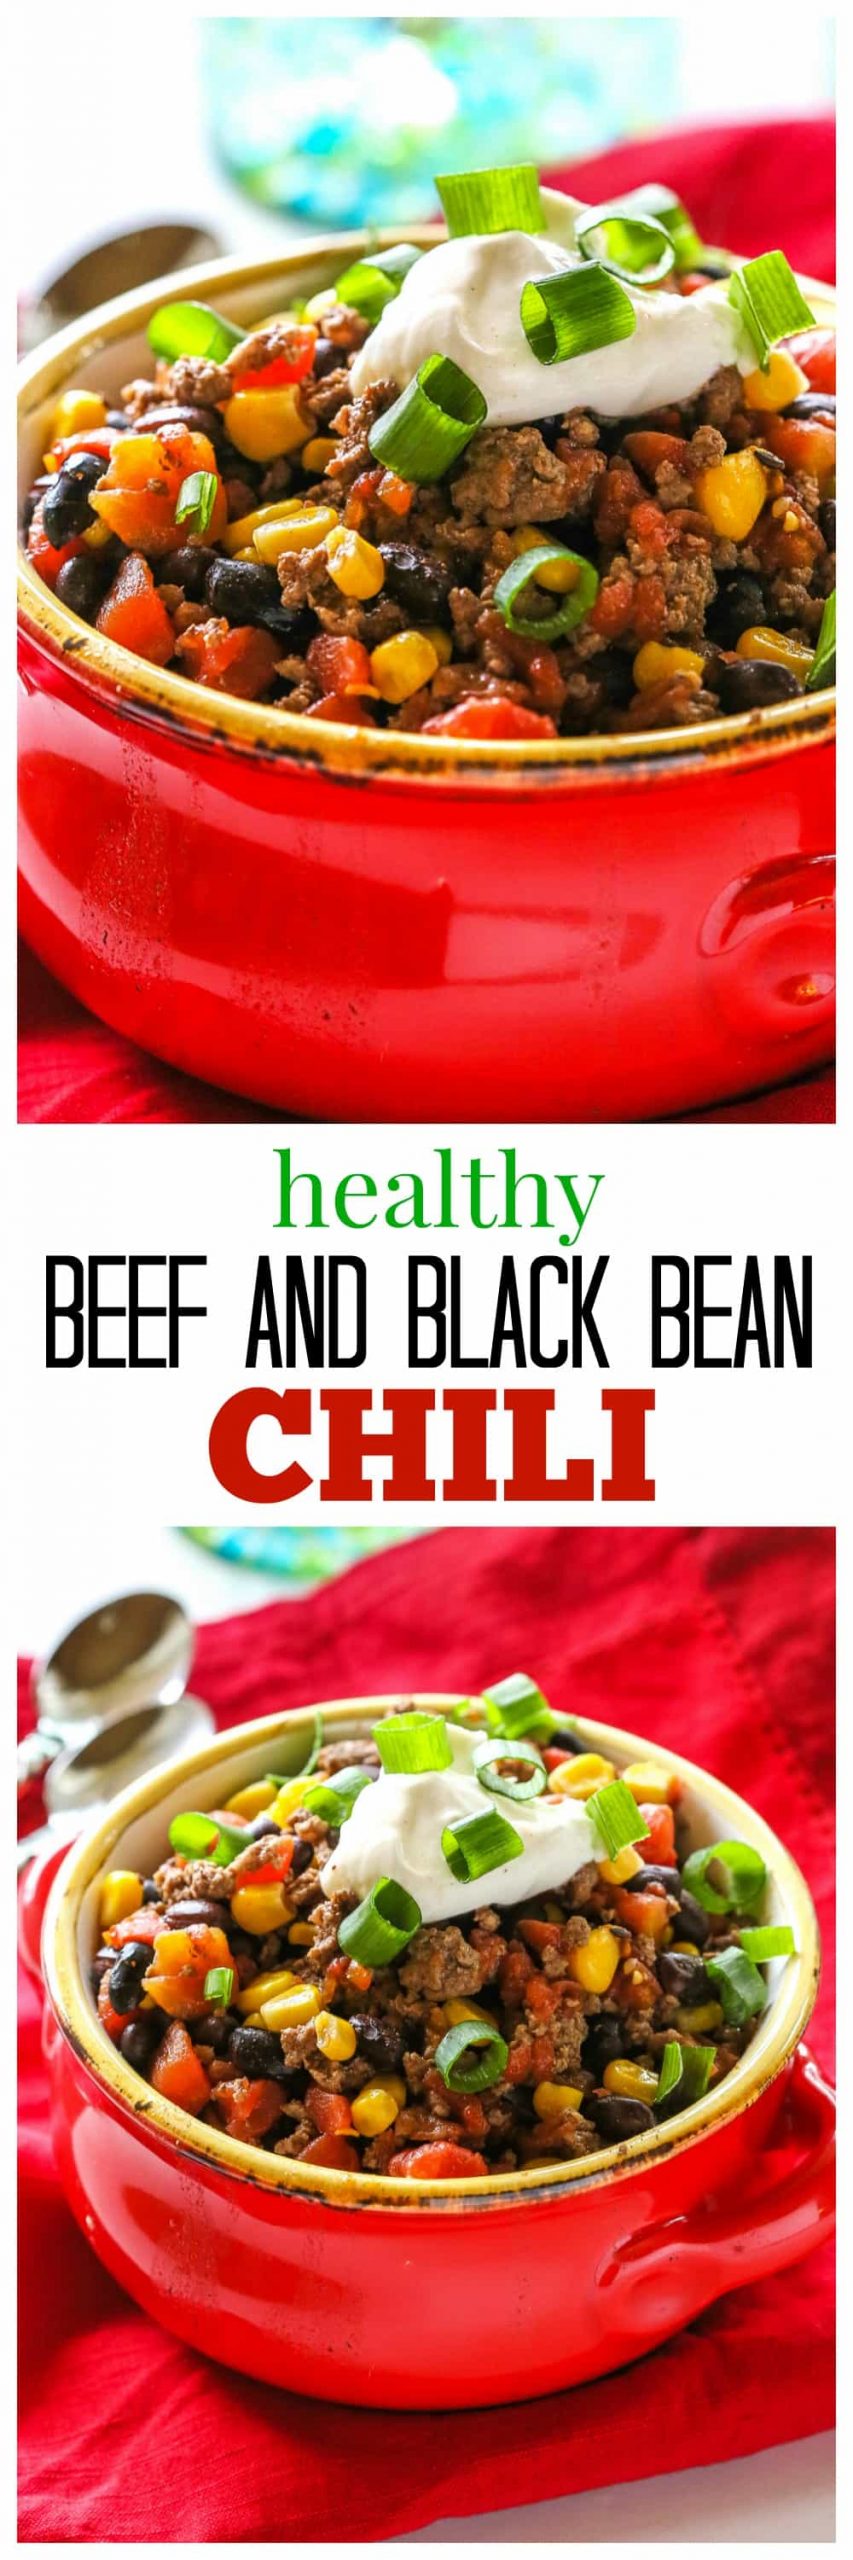 Healthy Spicy Beef and Black Bean Chili - 298 calories per serving! #healthy #black #bean #beef #chili #recipe